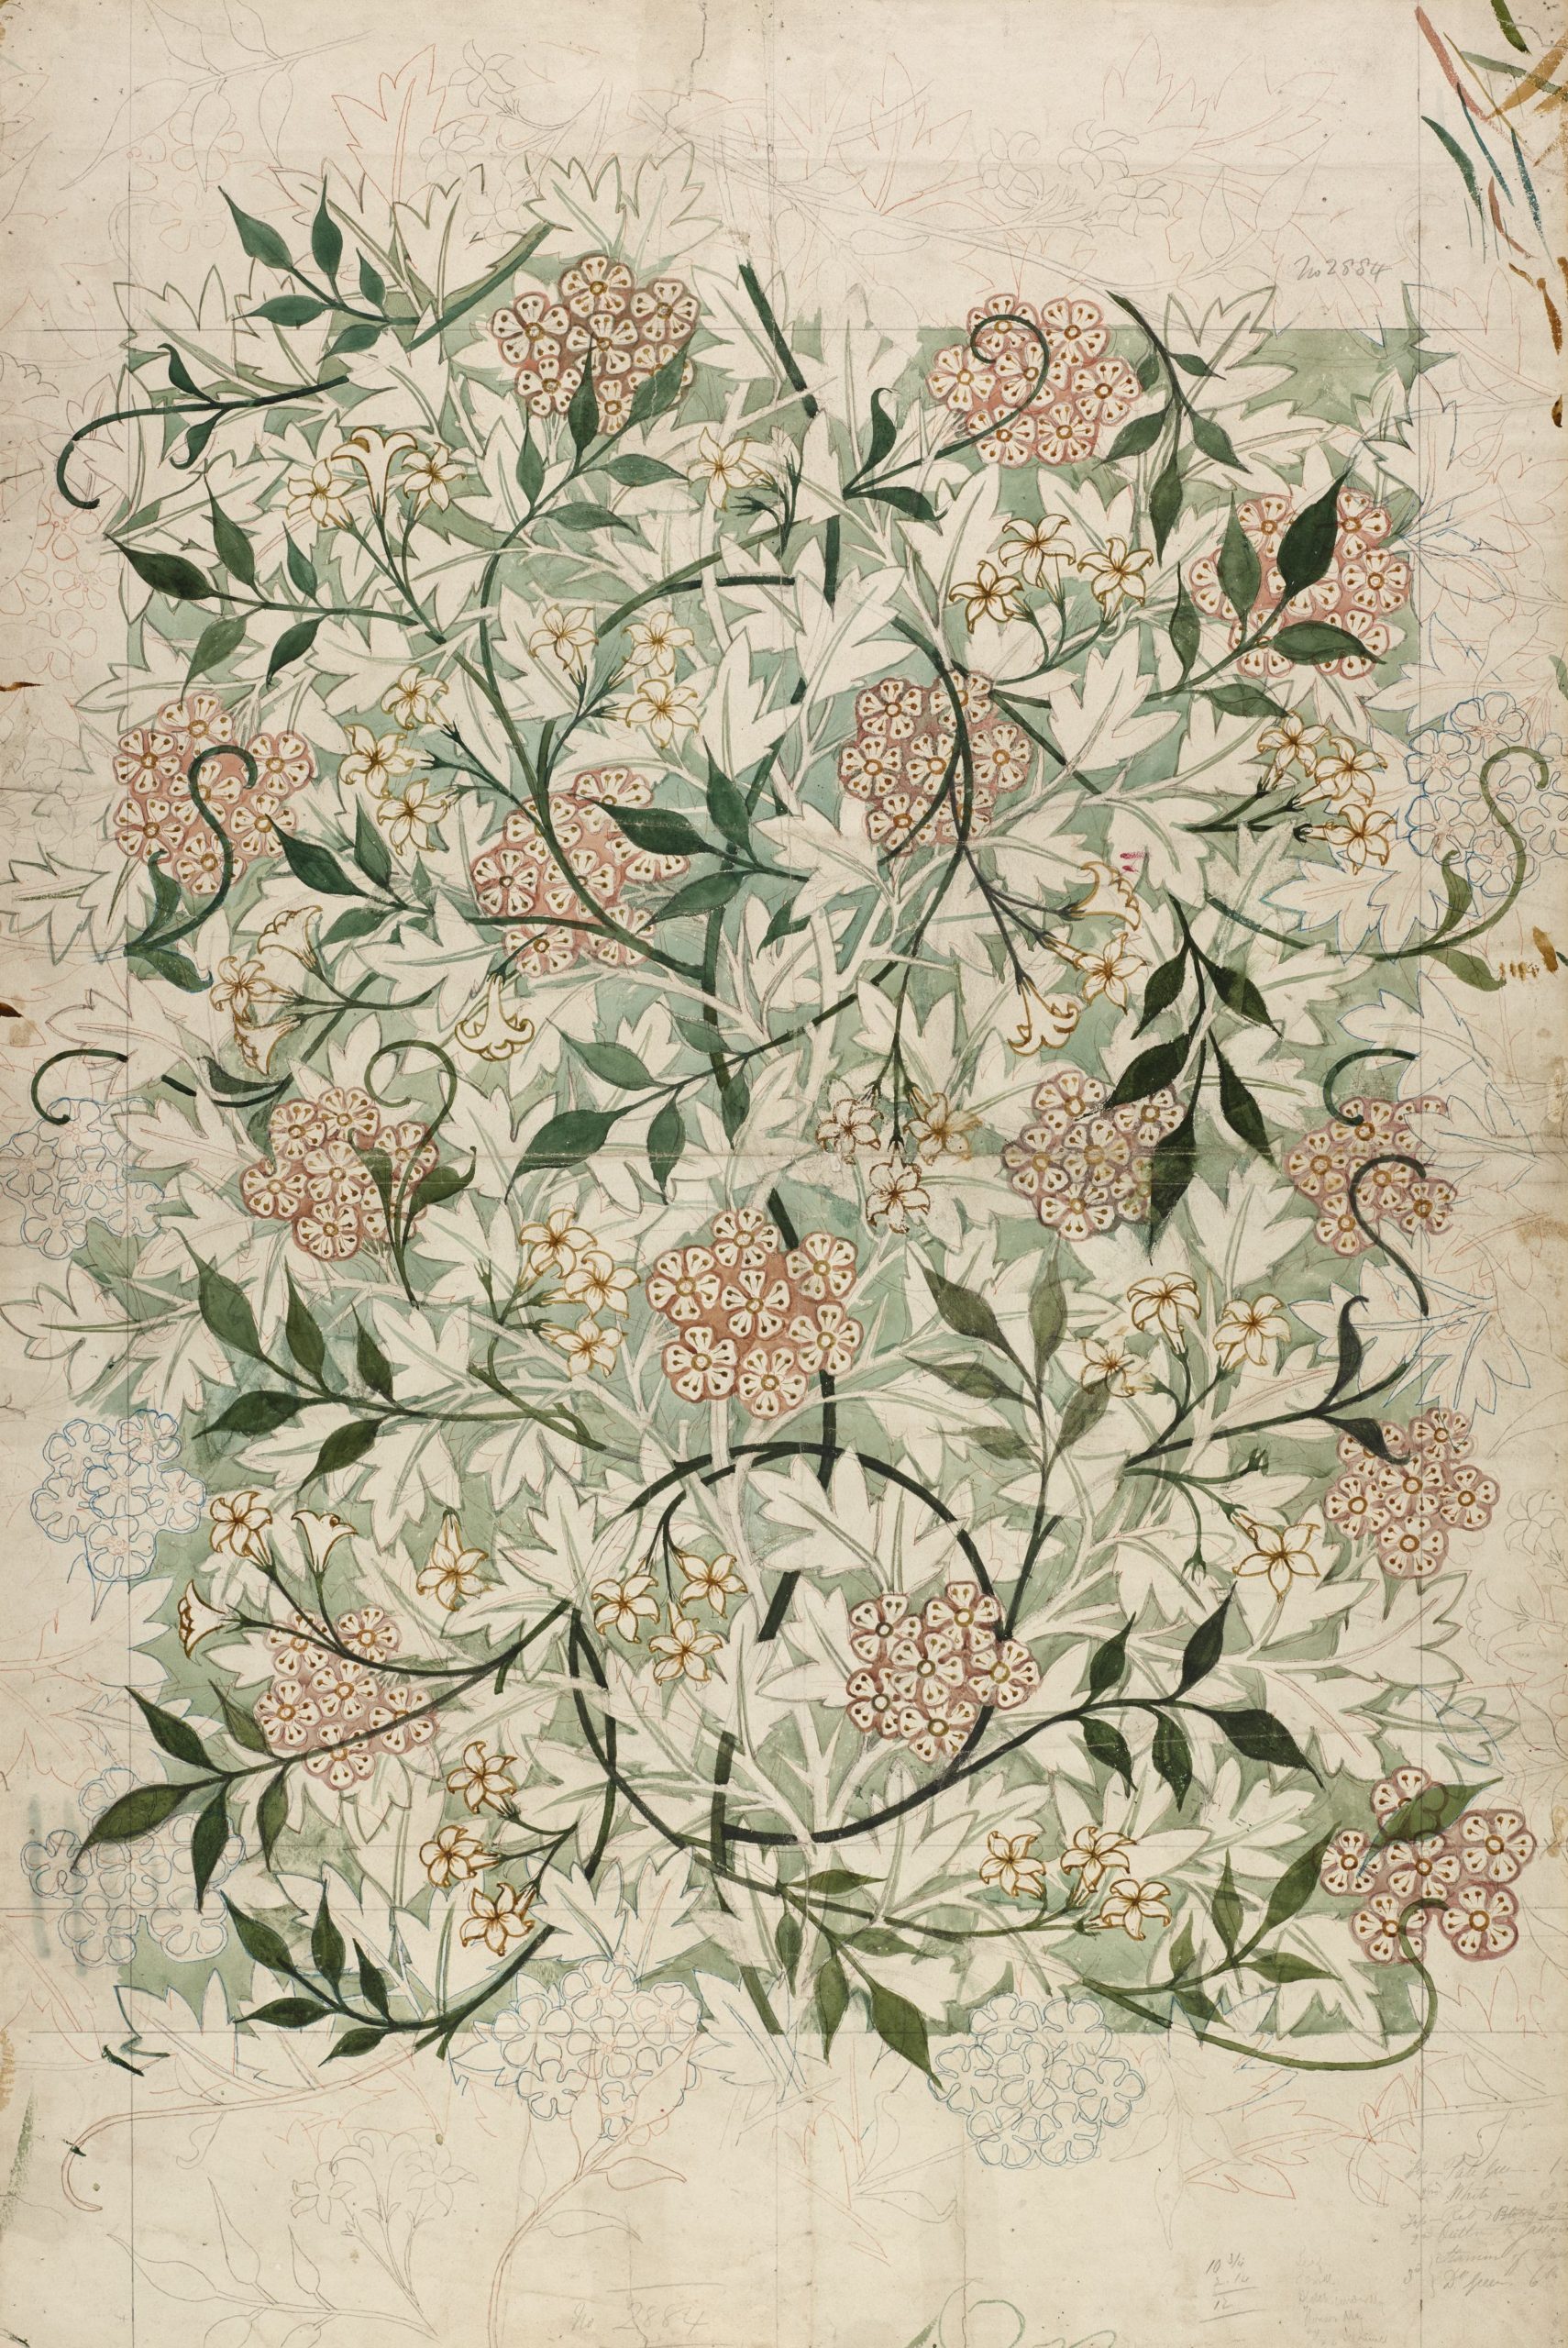 wall painting of flowers found at Birmingham Museums Trust 